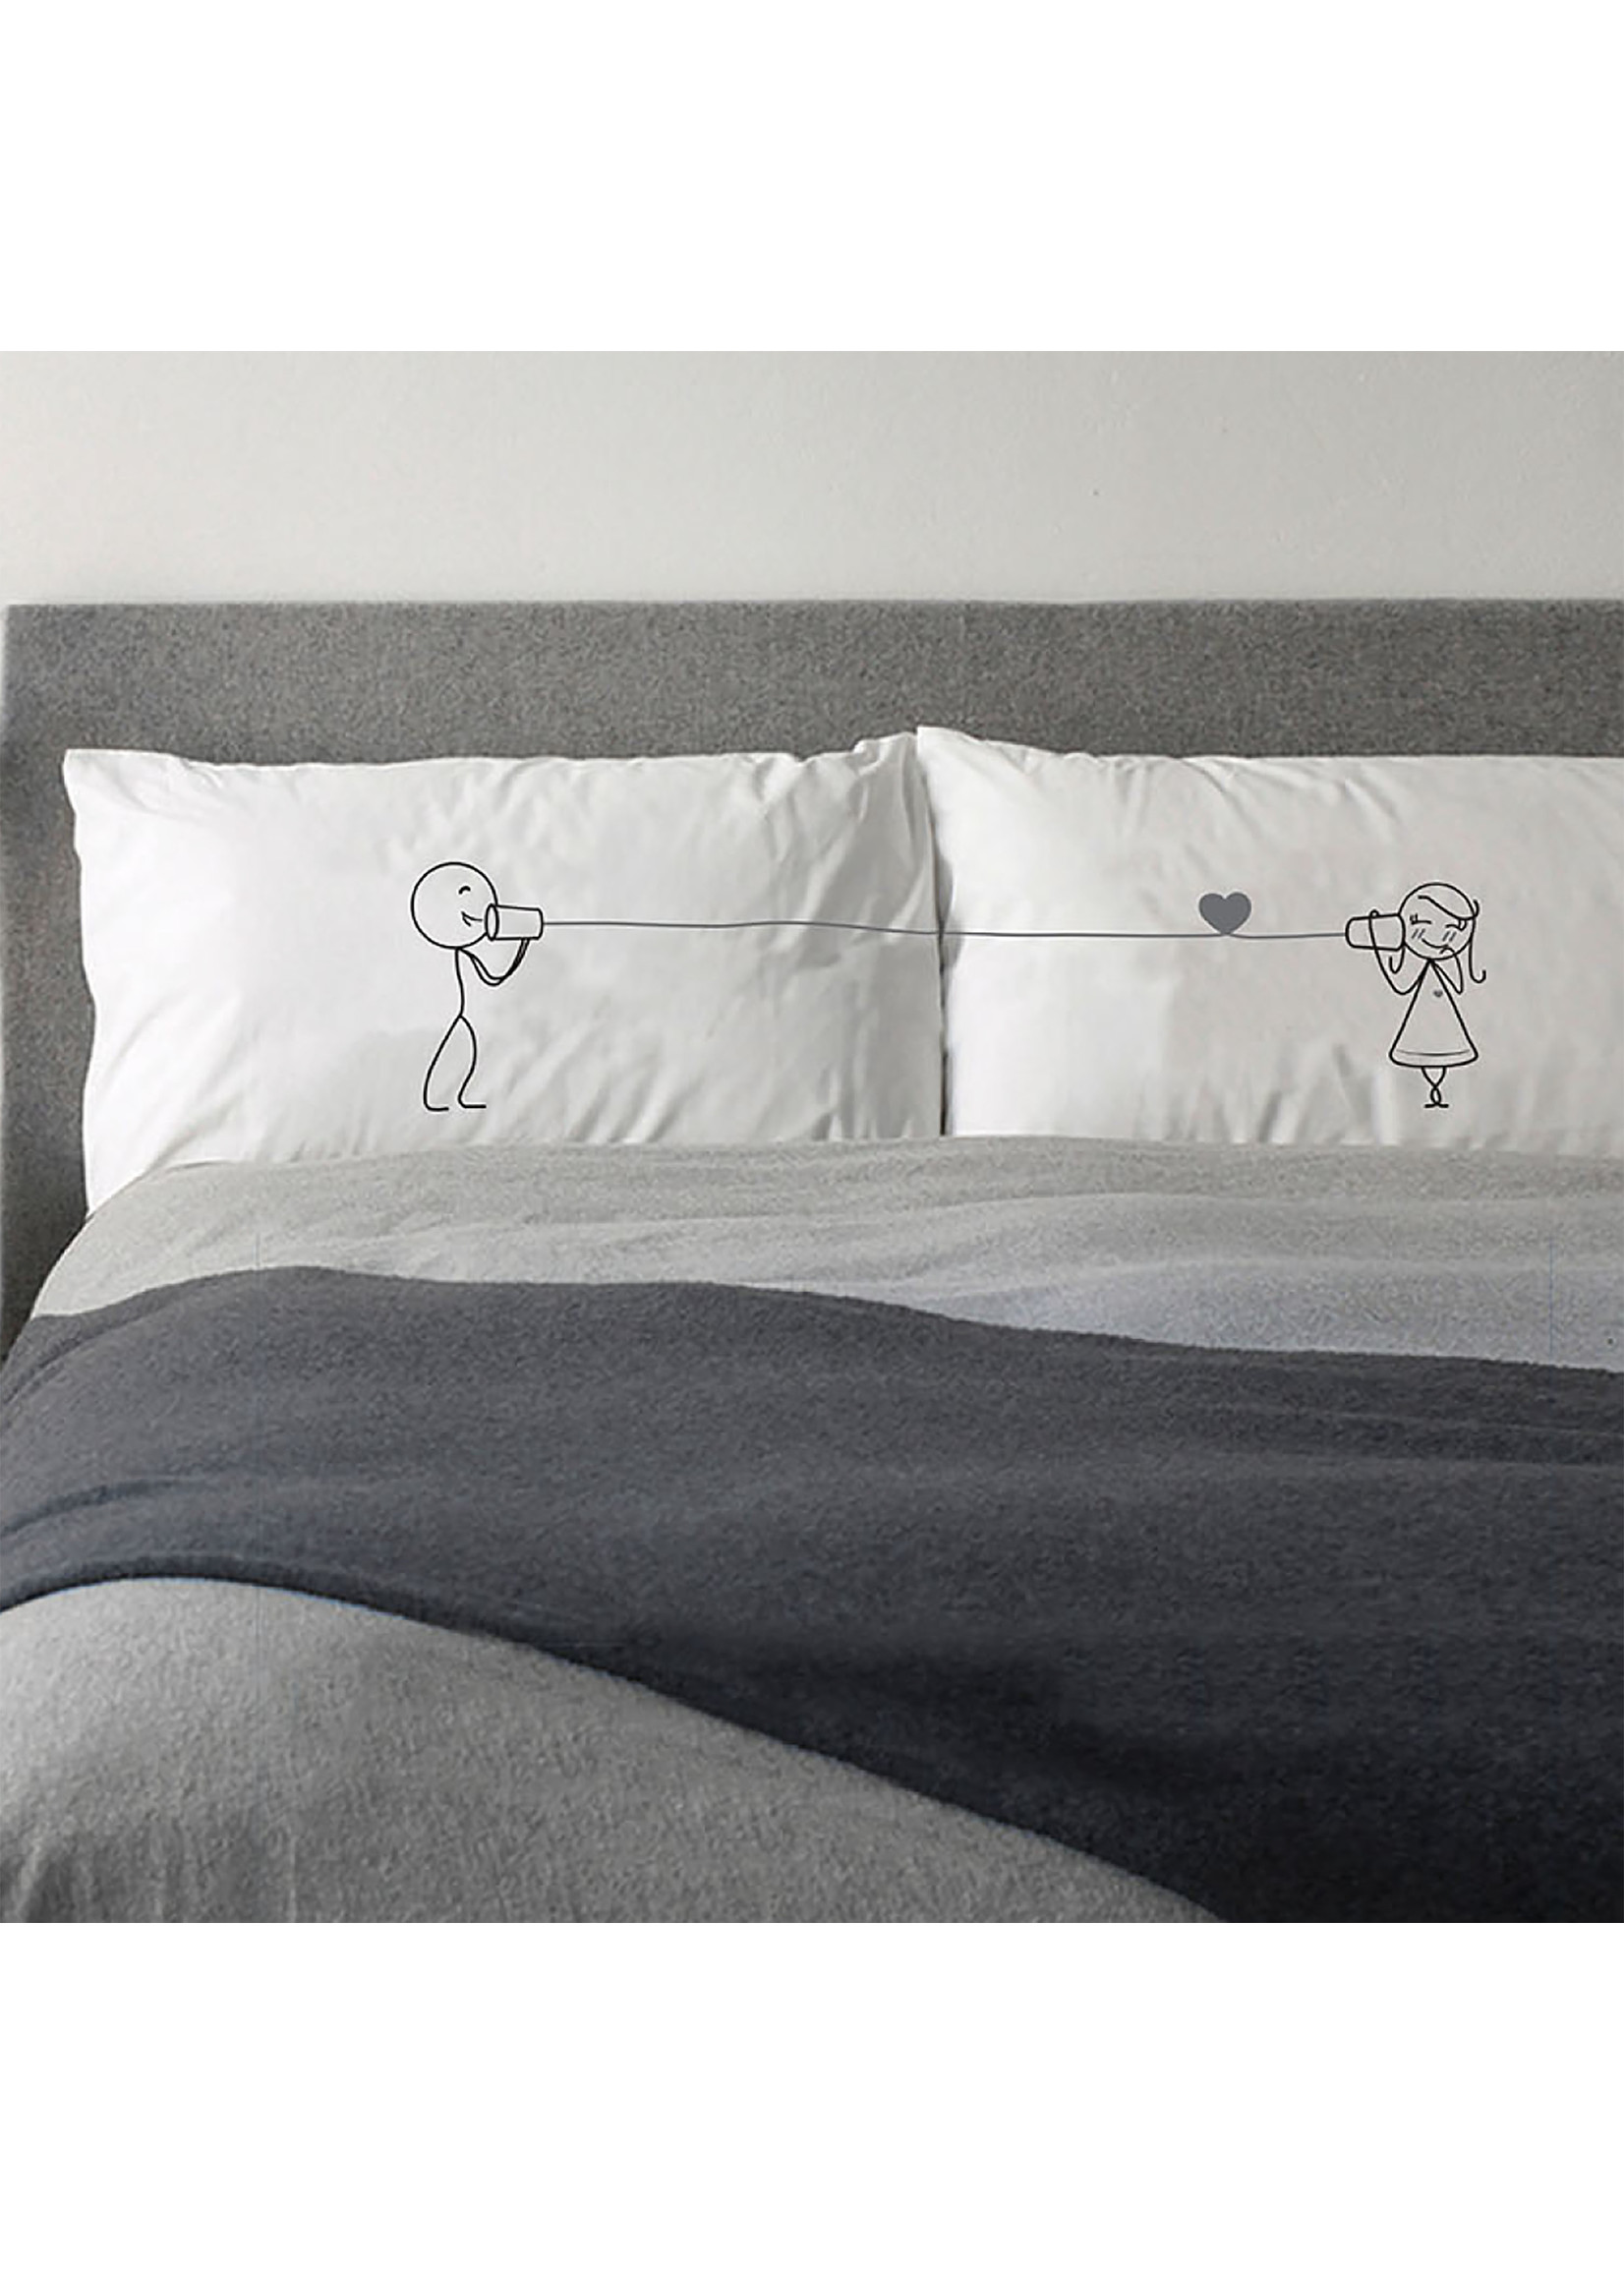 Pair His and Her Matching Pillowcases